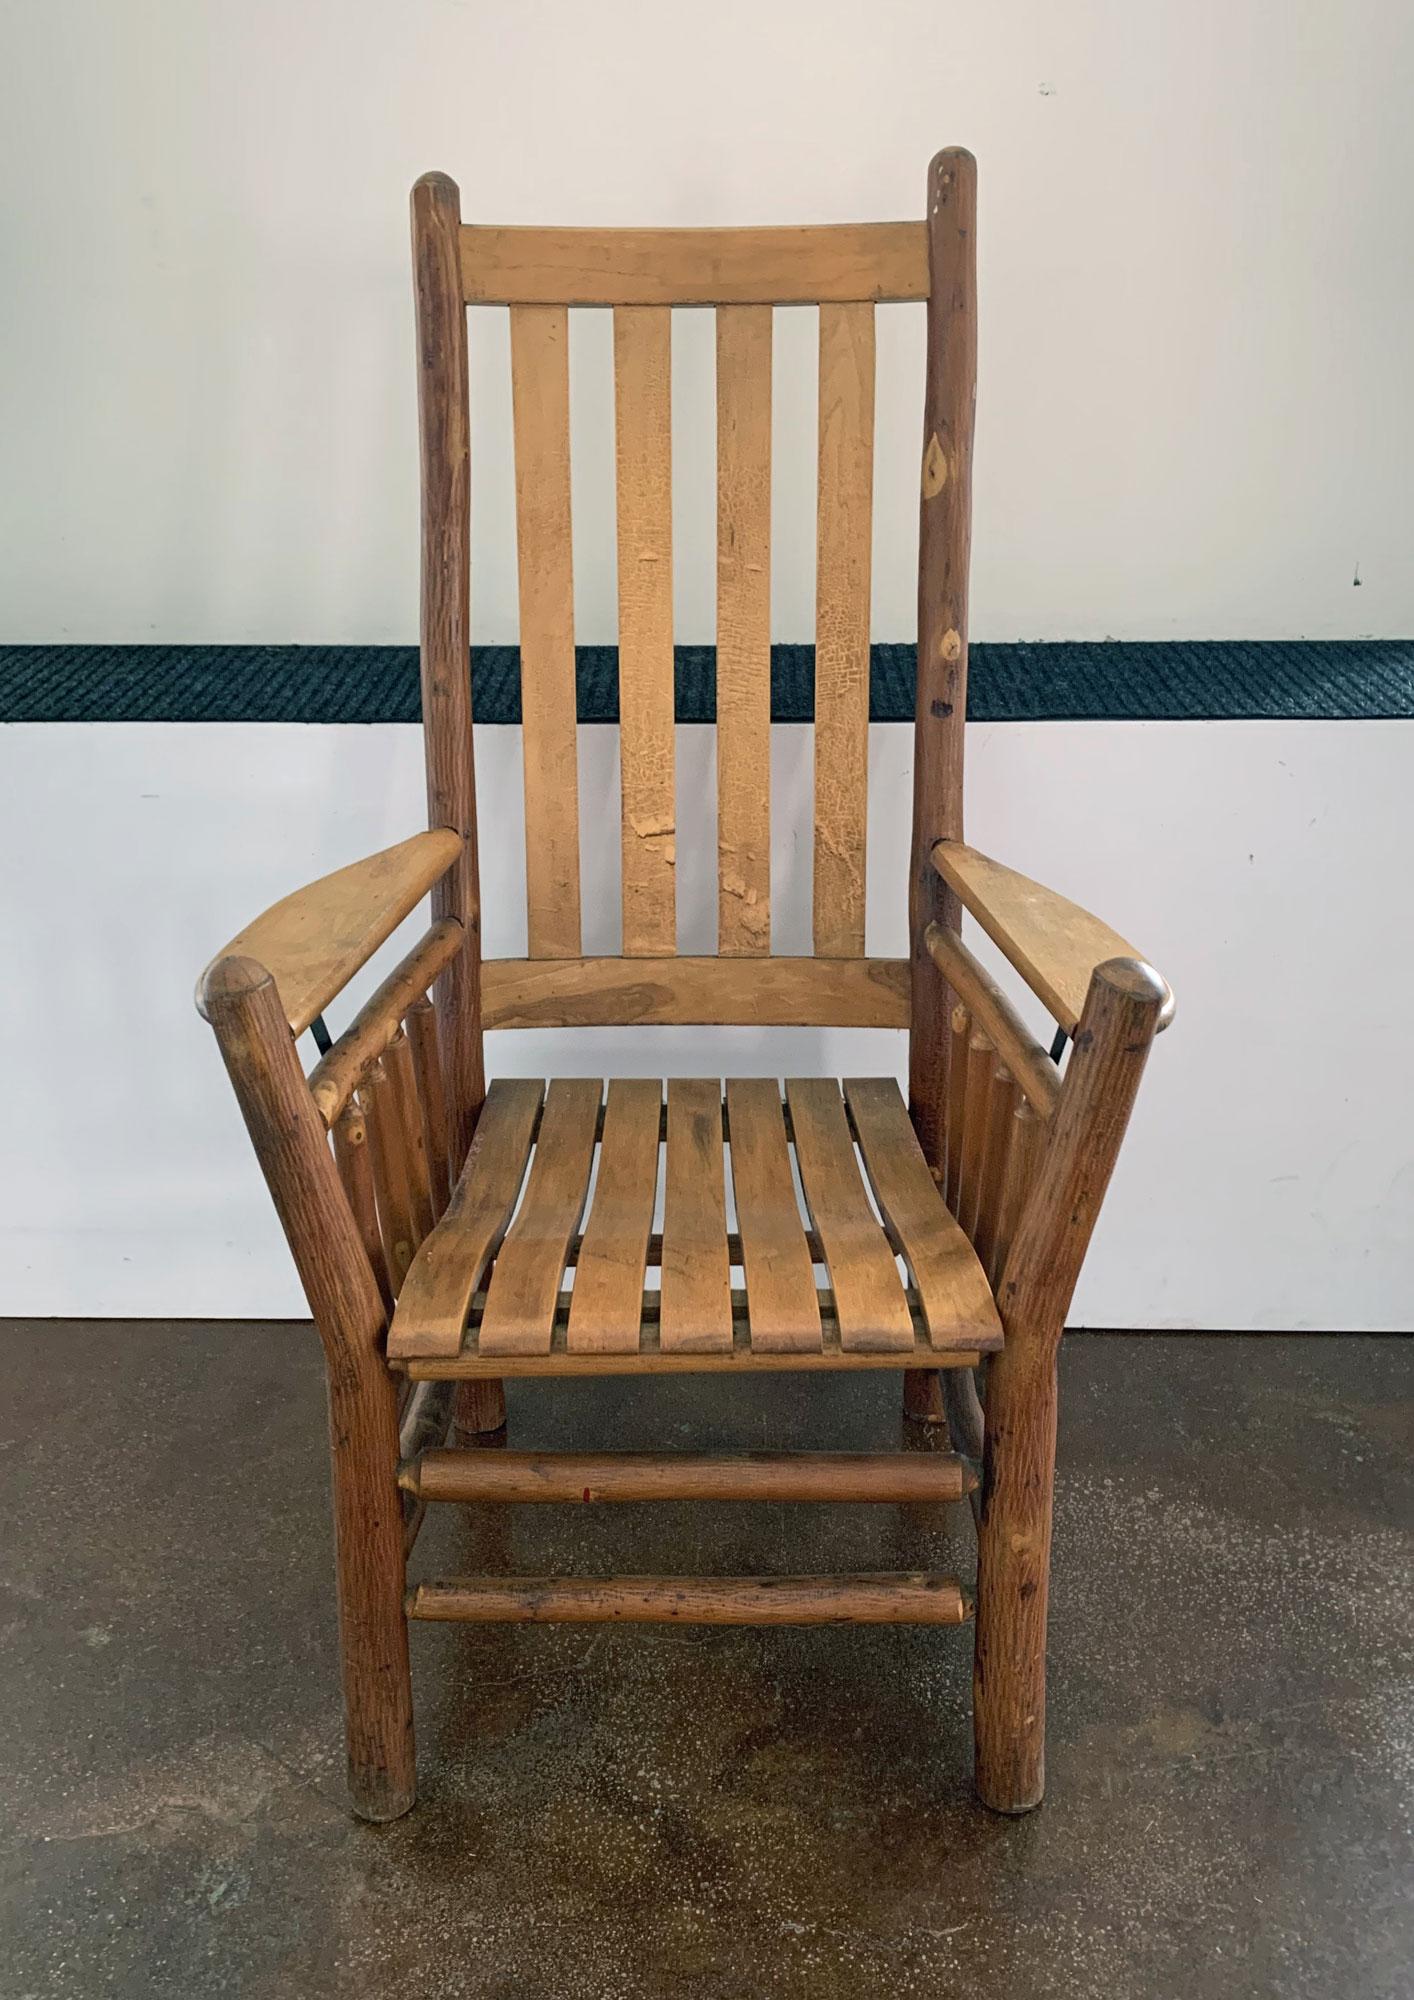 Old Hickory tall-back paddle-arm chair with slat seat and back, circa 1940. 
Stamped Old Hickory Furniture Co., Martinsville, this side chair is in pristine condition. 
Wonderful old hickory side chair with slat arms for comfort and that old country